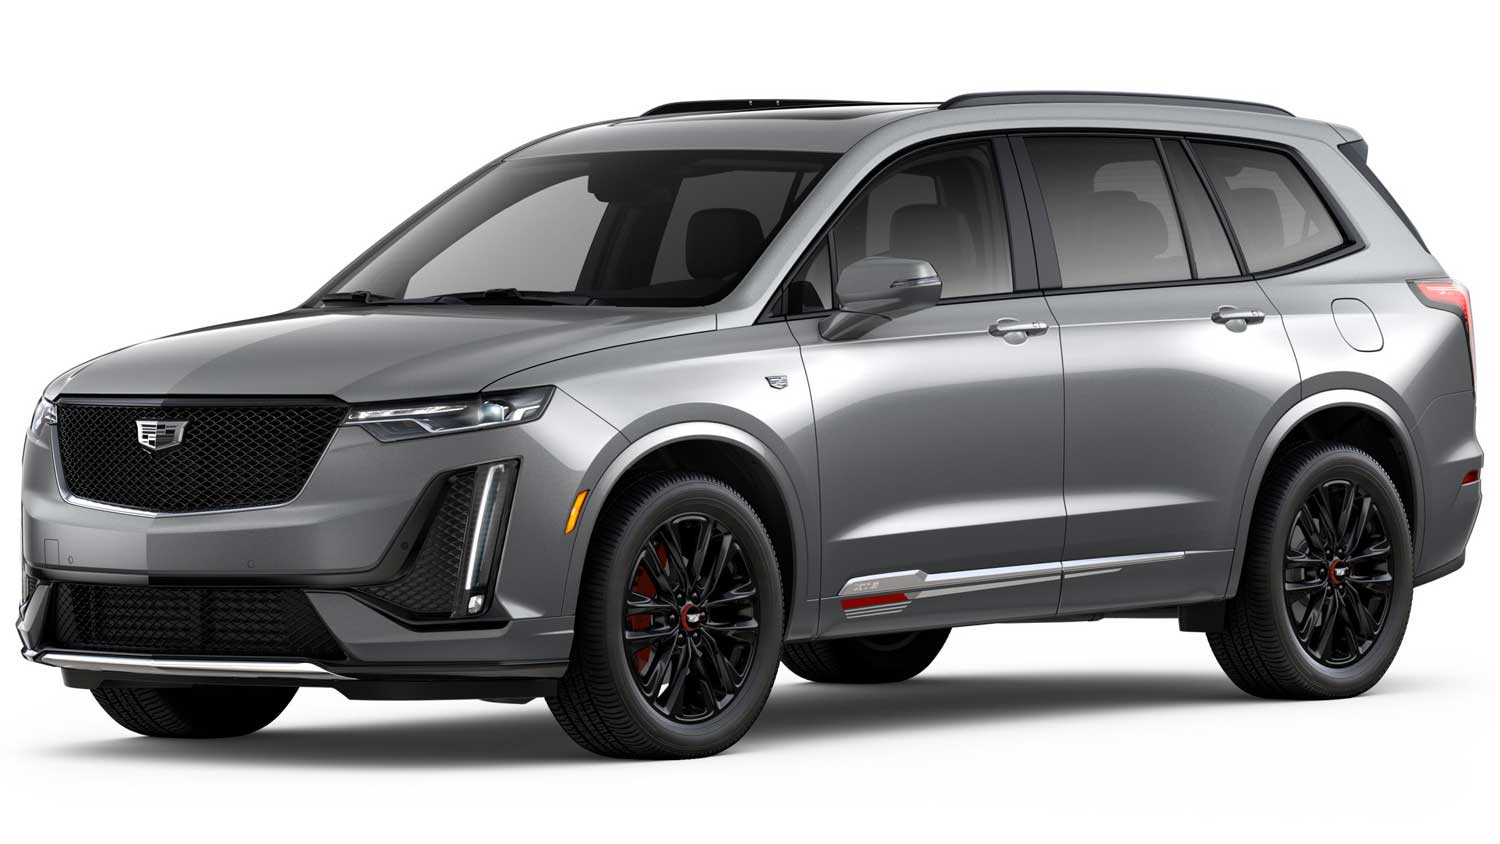 2024 Cadillac XT6 Argent Silver Metallic GXD Red Accent Package LPO PDK Configurator Exterior 001 Front Three Quarters 